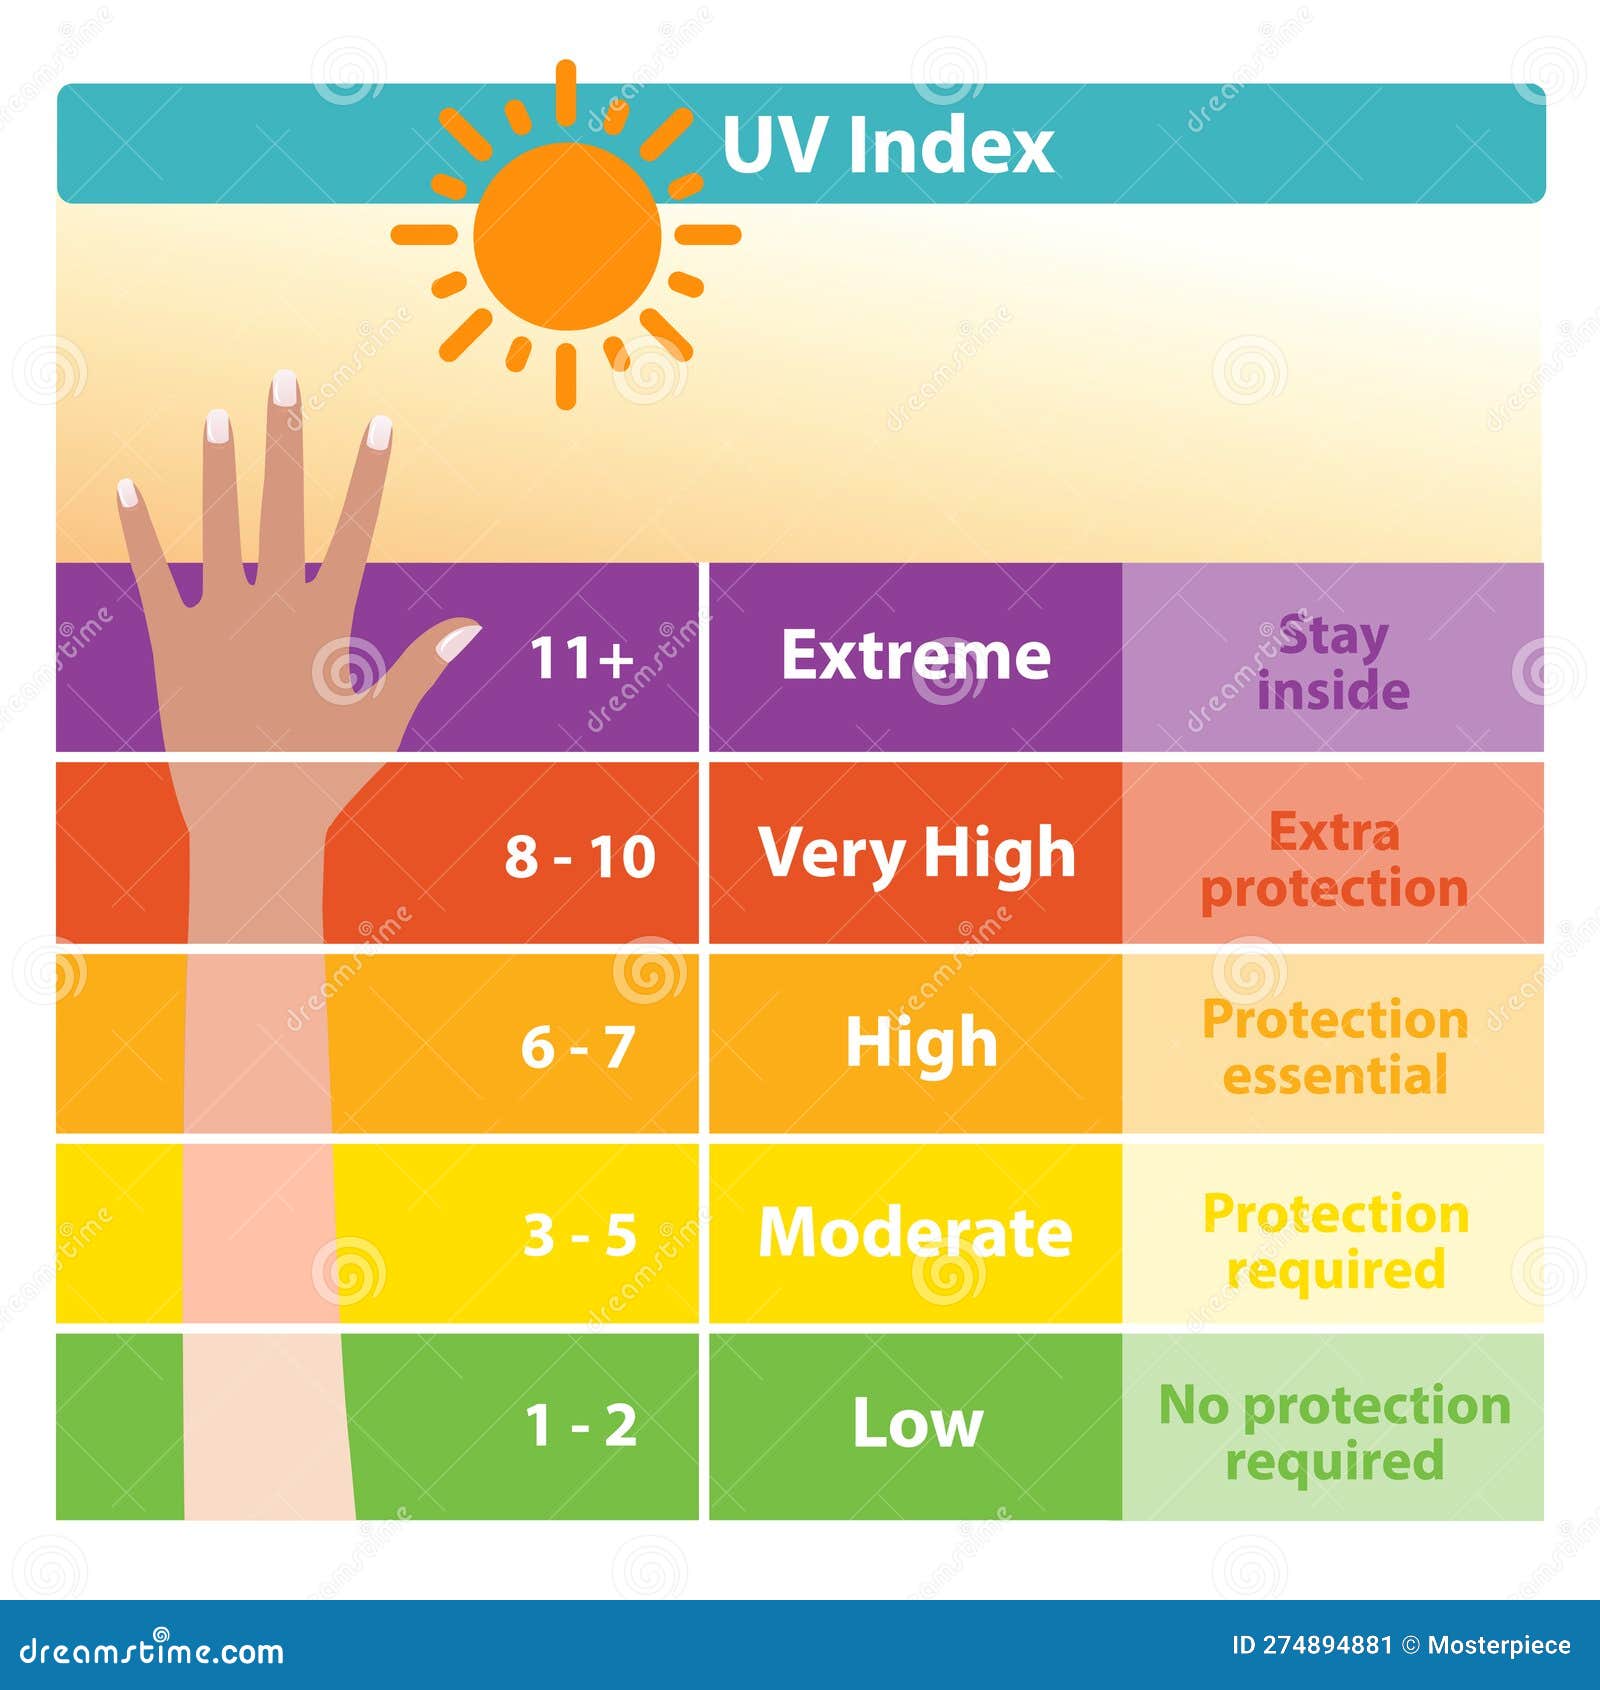 https://thumbs.dreamstime.com/z/uv-index-chart-tanned-skin-vector-illustration-ultraviolet-scale-represents-intensity-radiation-produced-sun-274894881.jpg